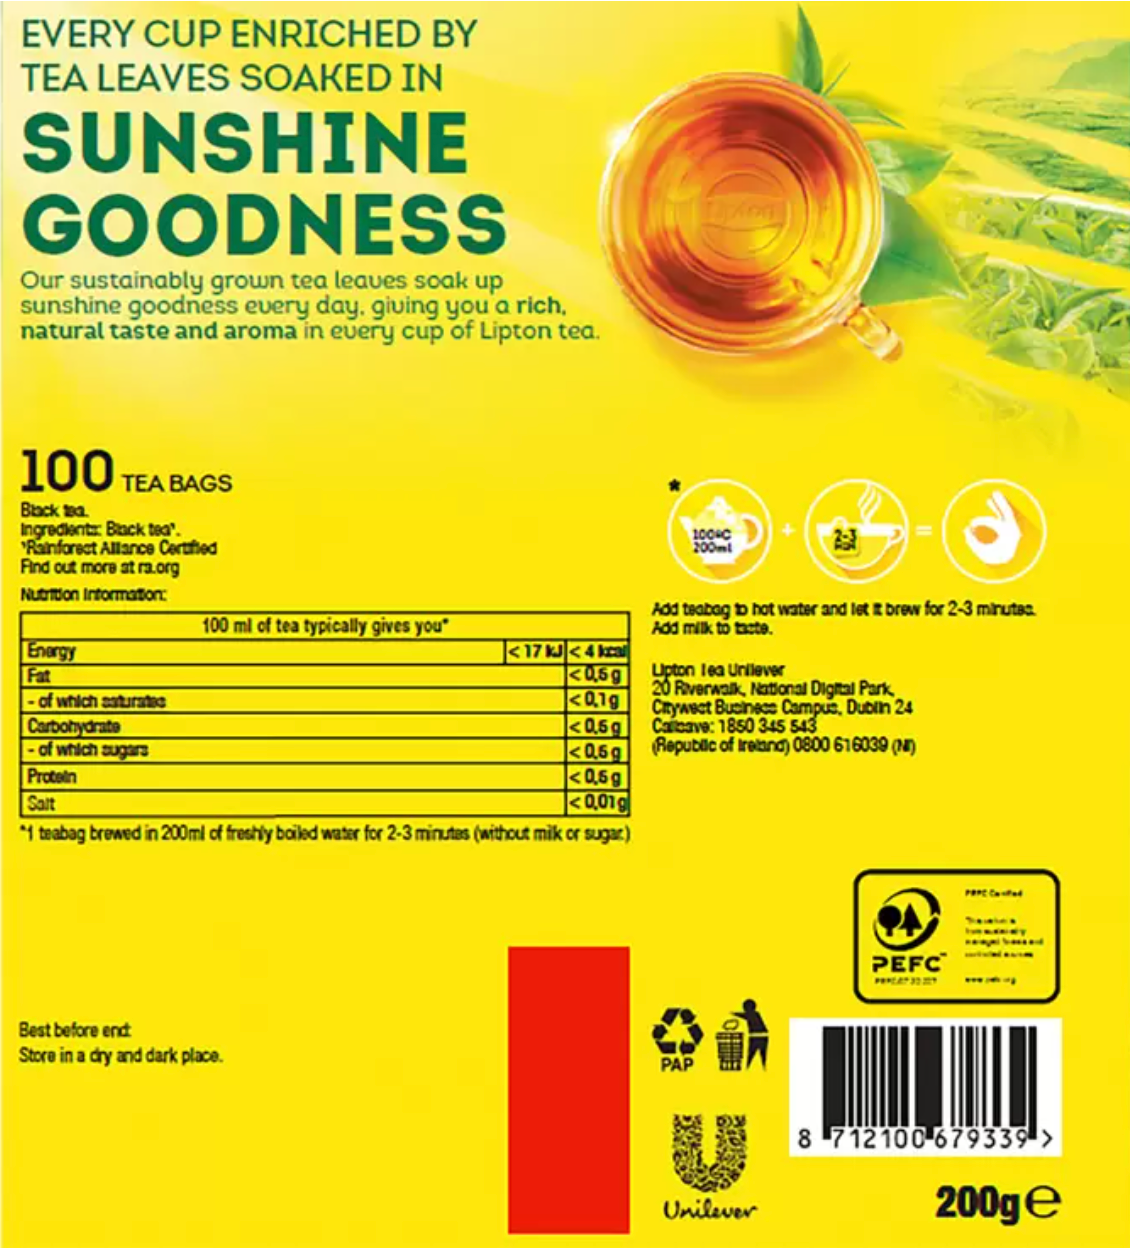 Lipton Yellow Label Tea Bags, 4 x 100 Pack - Savour the Perfect Cuppa